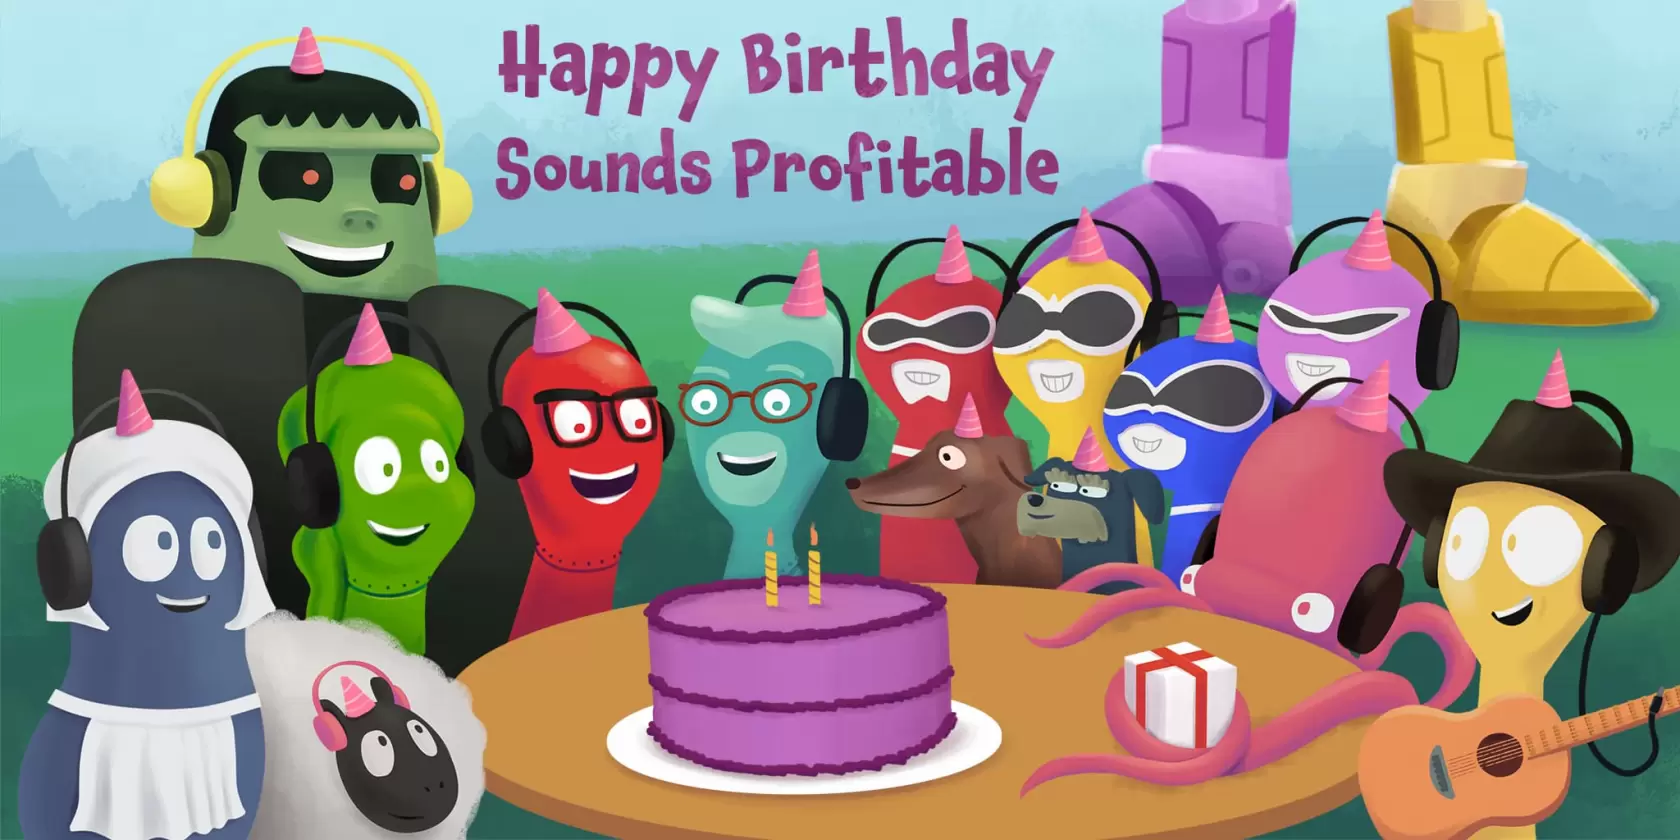 Sounds Profitable – Two years later